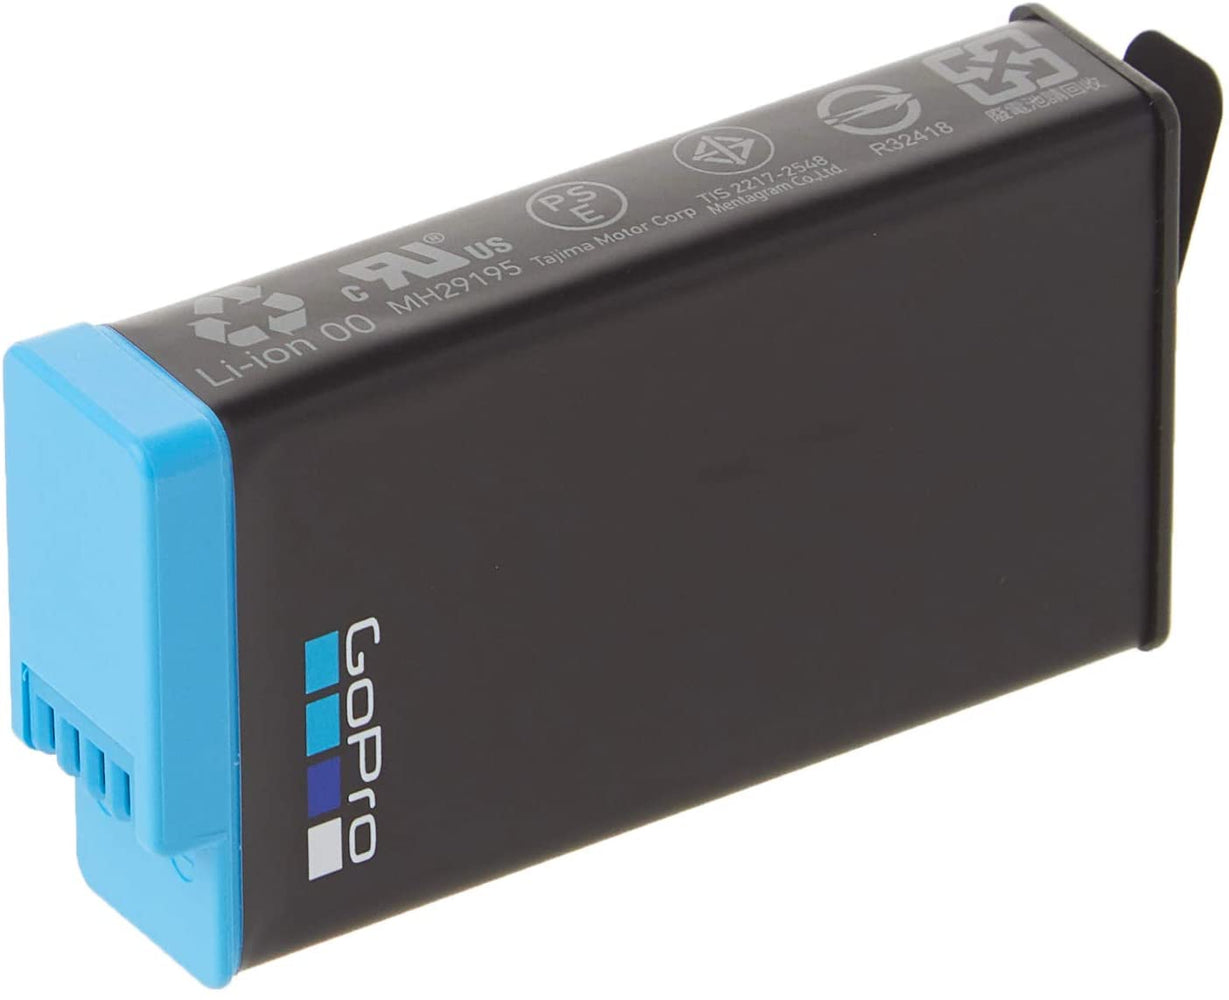 GoPro Rechargeable Battery (MAX) - Official GoPro Accessory